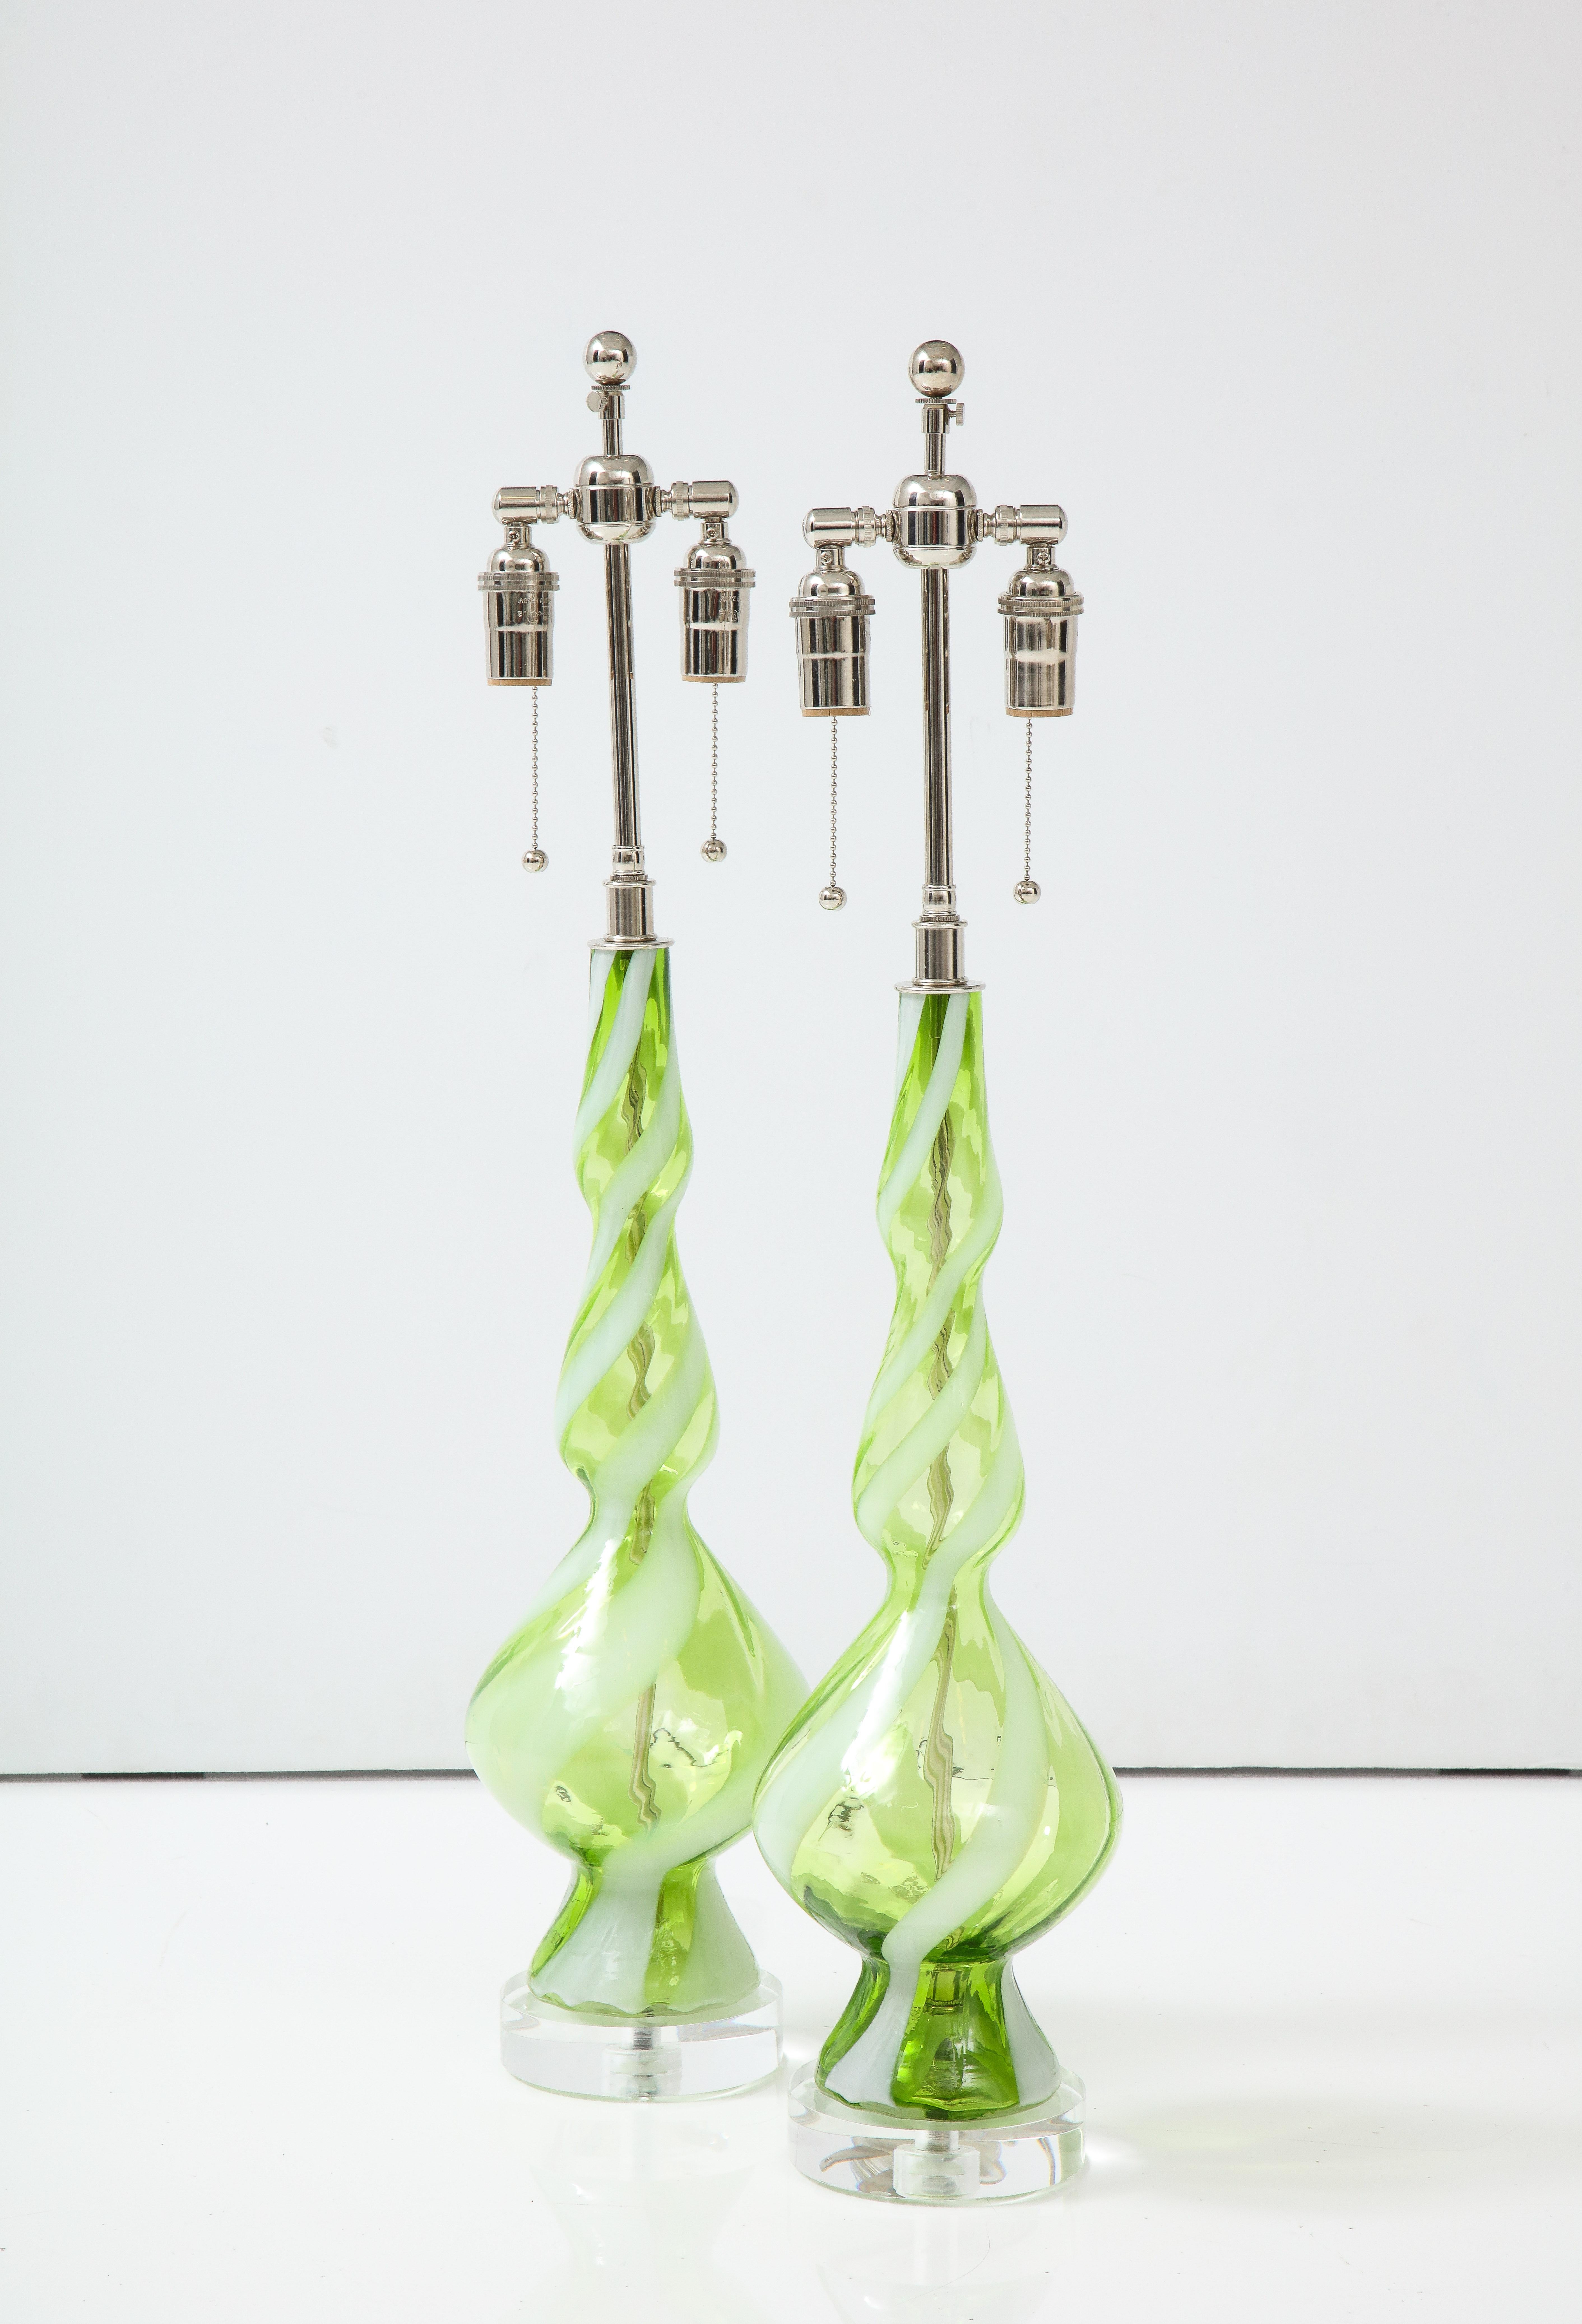 Pair of mid century Murano glass lamps in a Sherbet Green with contrasting
white spirals.
The lamps sit on 1.25